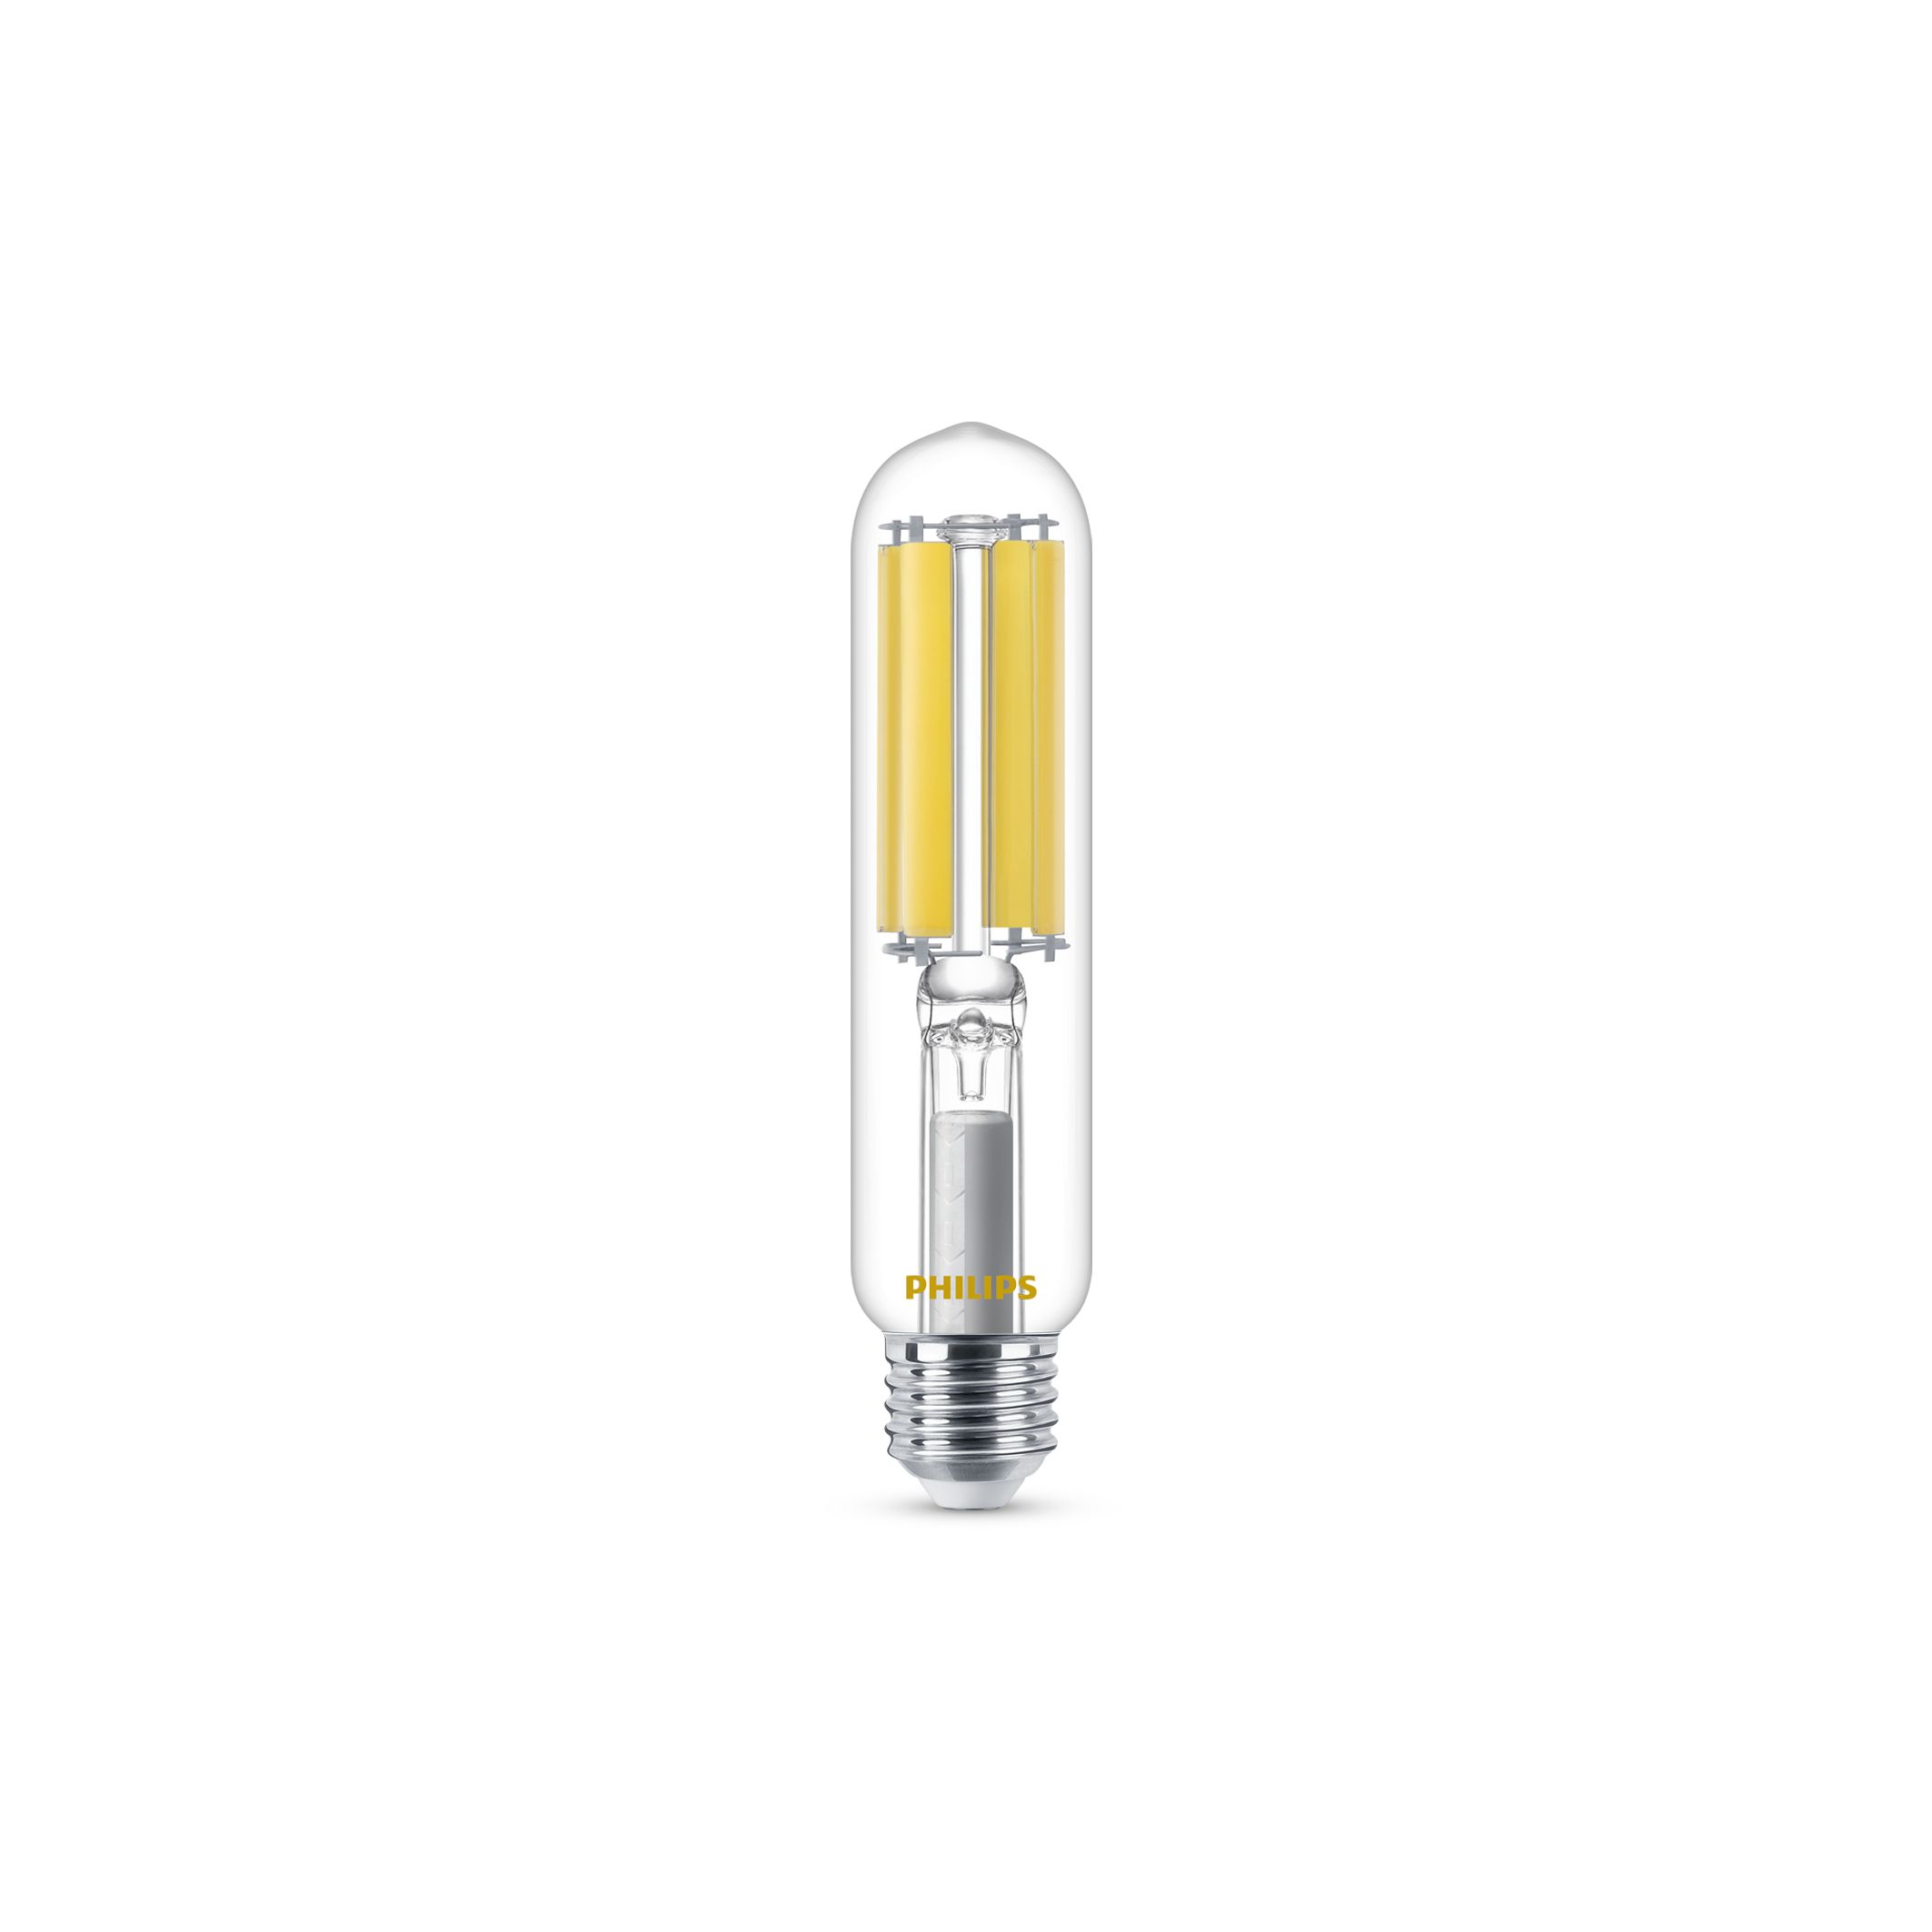 Replacement for Kandolite Mhc70/g12/942 Light Bulb by Technical Precision 